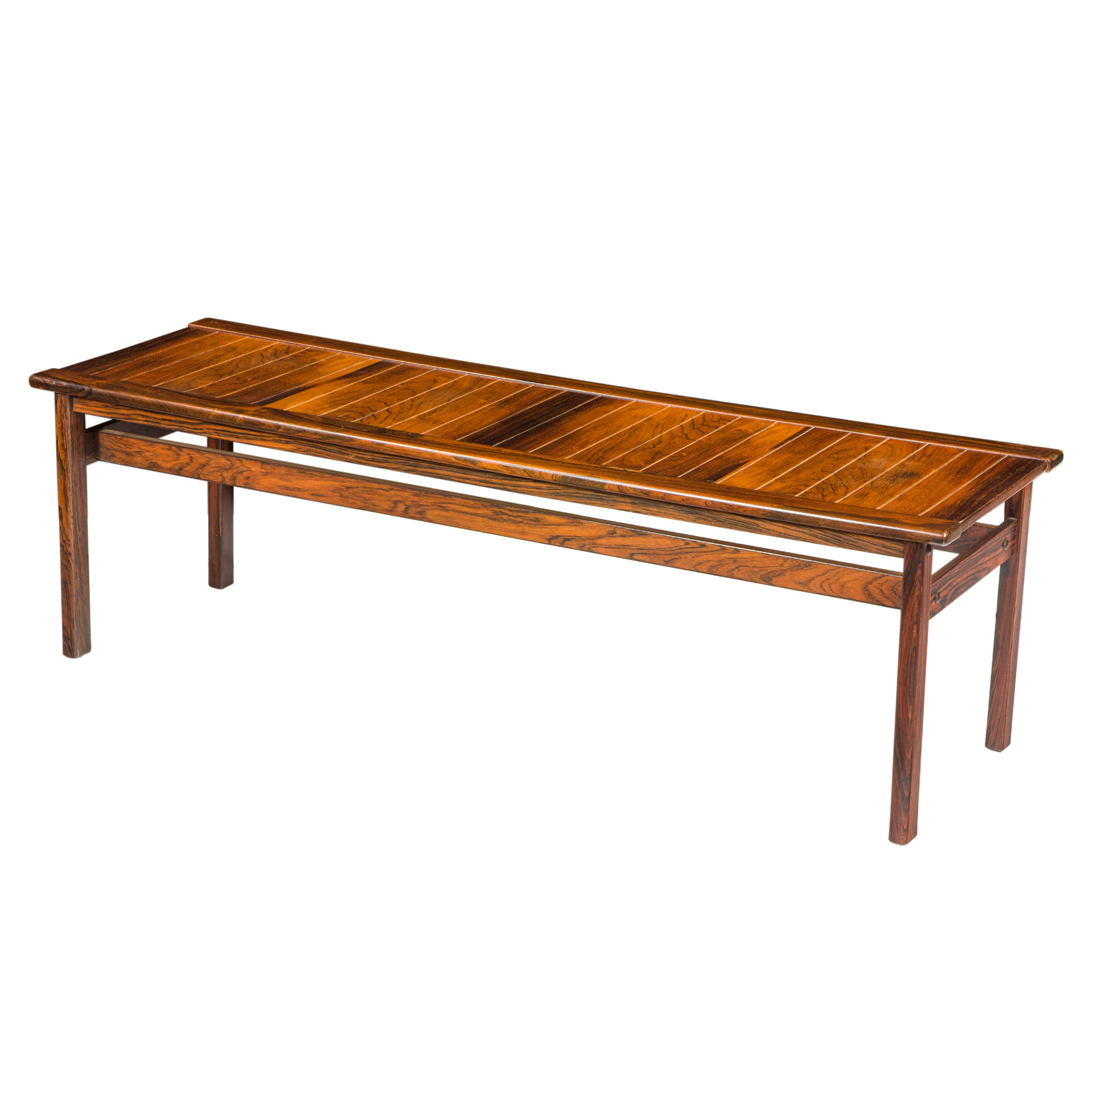 INGMAR ANDERSSON COFFEE TABLE 3a1405